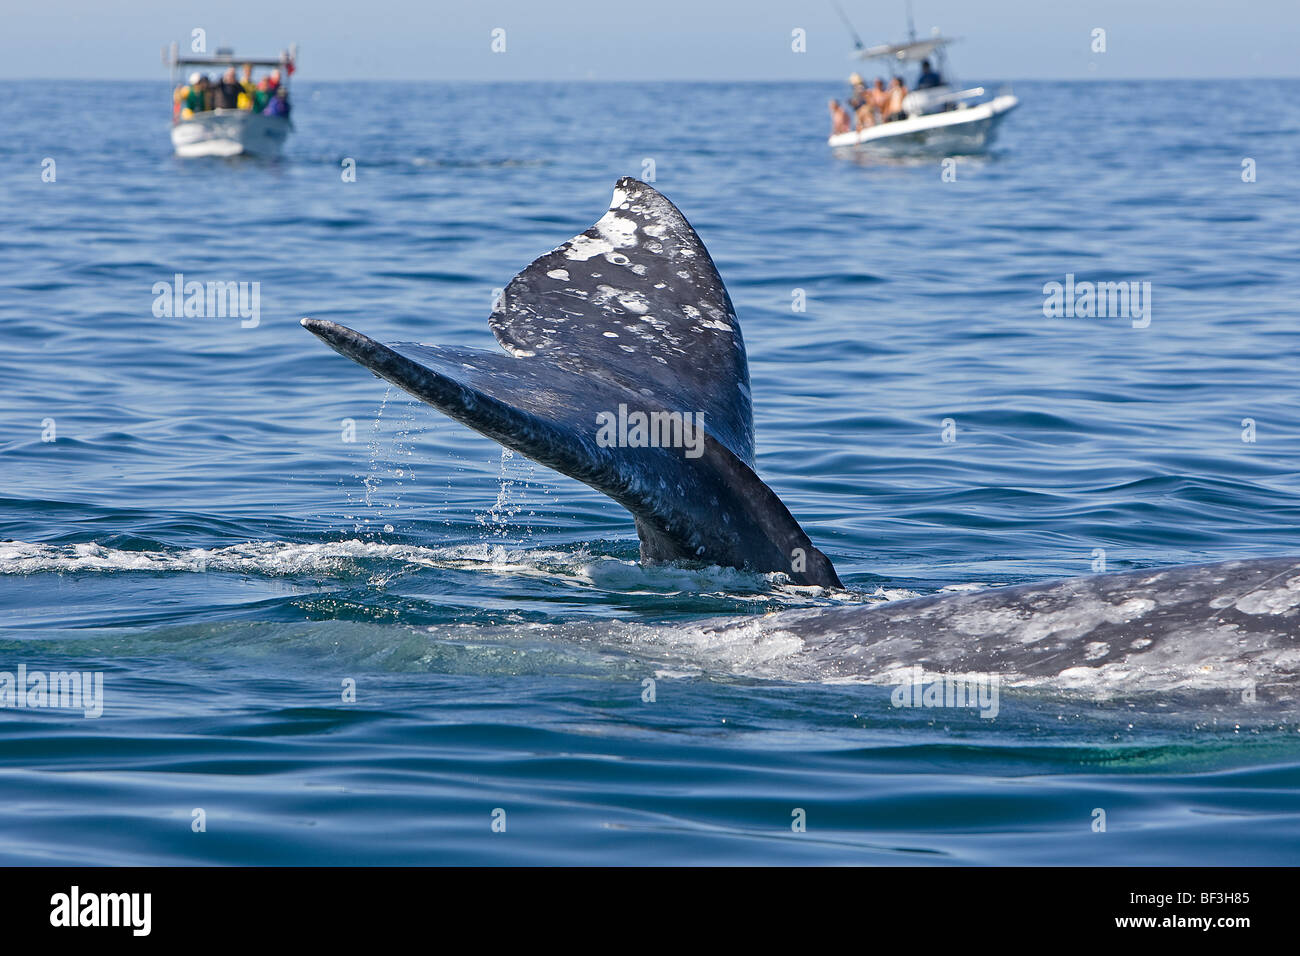 Diving Gray Whale, Grey Whale (Eschrichtius robustus, Eschrichtius gibbosus) in front of whale-watching boats. Stock Photo